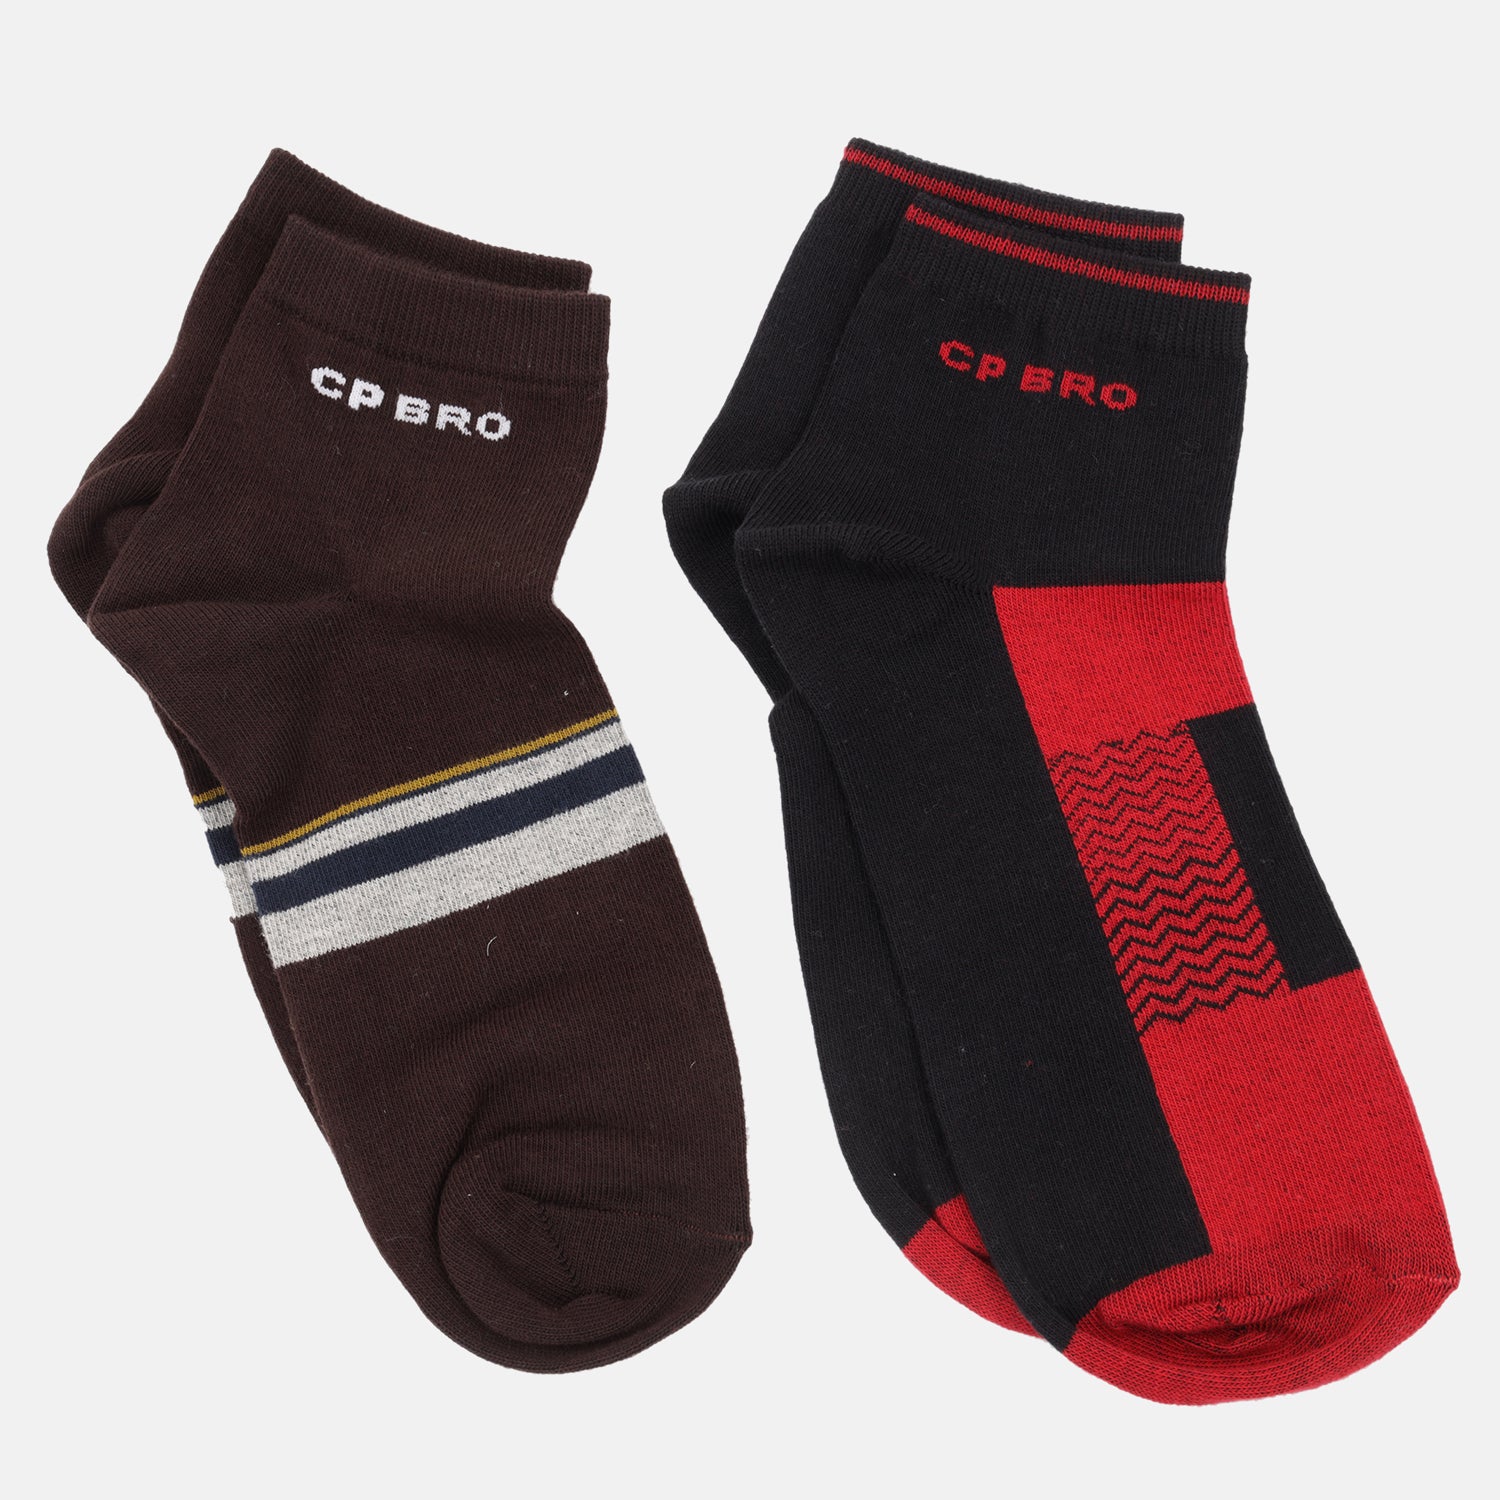 CP BRO Men's Cotton Ankle Socks - Pack of 2 - Brown & Red | B-SKS-A-BRWRED